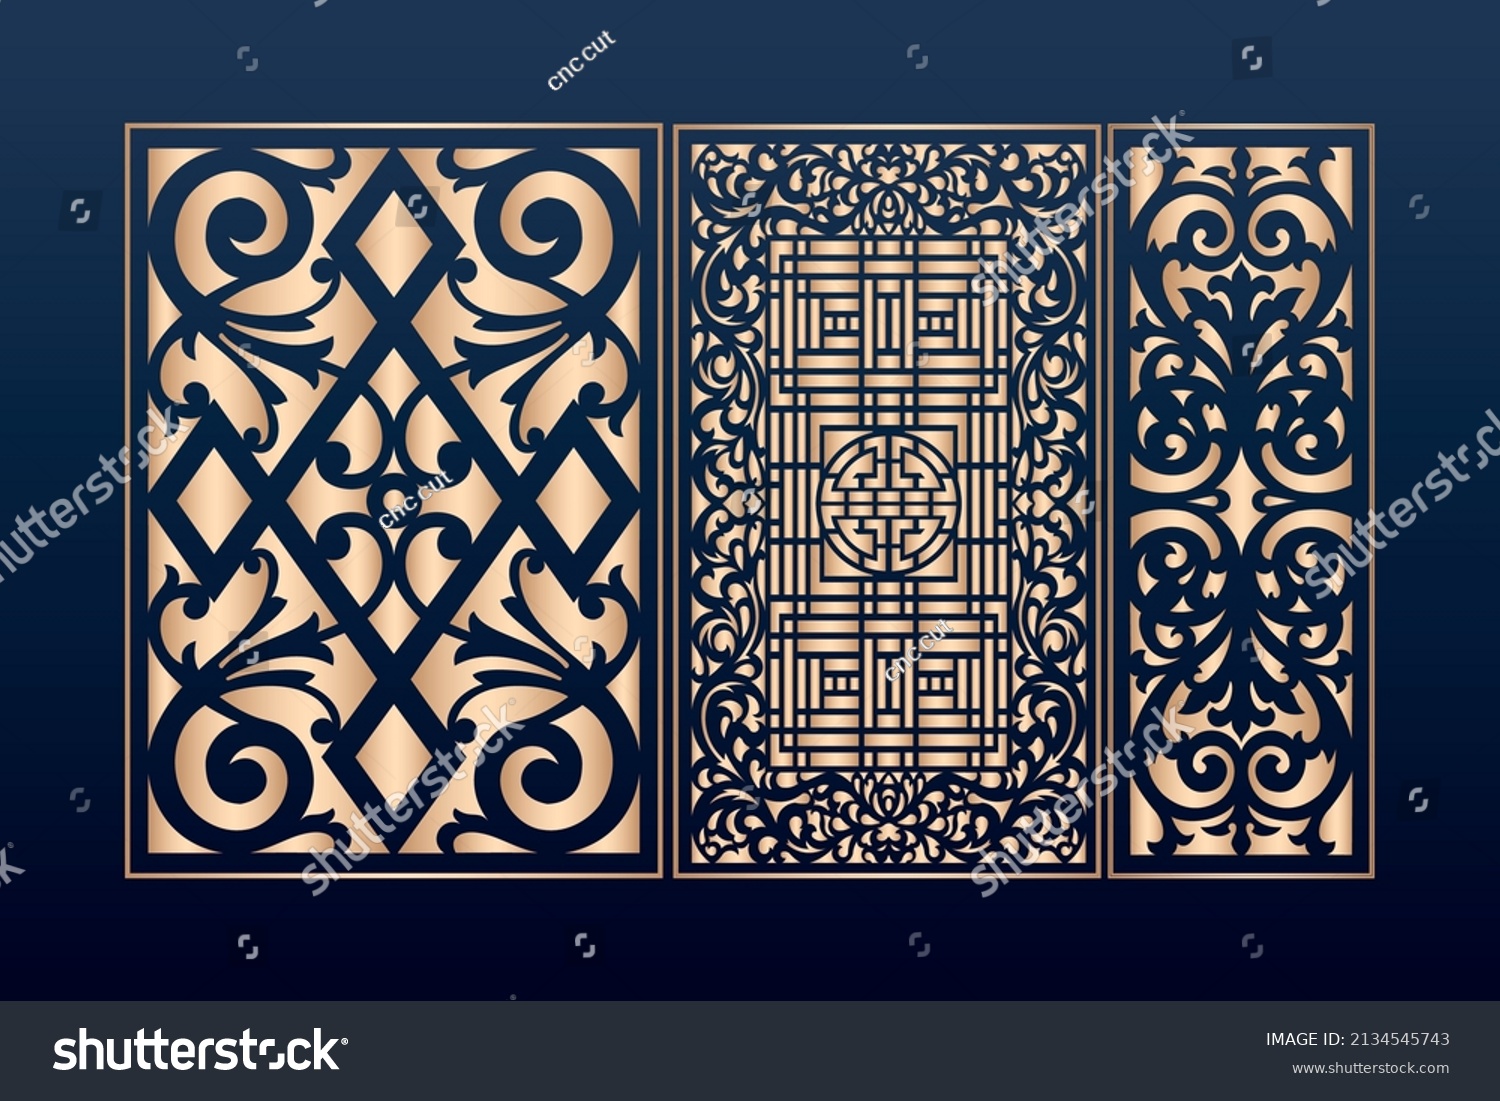 SVG of 
Triangle geometric pattern gold black background
Decorative laser cut panels template with abstract texture. geometric and floral laser cutting or engraving panel vector illustration set. abstract cu svg